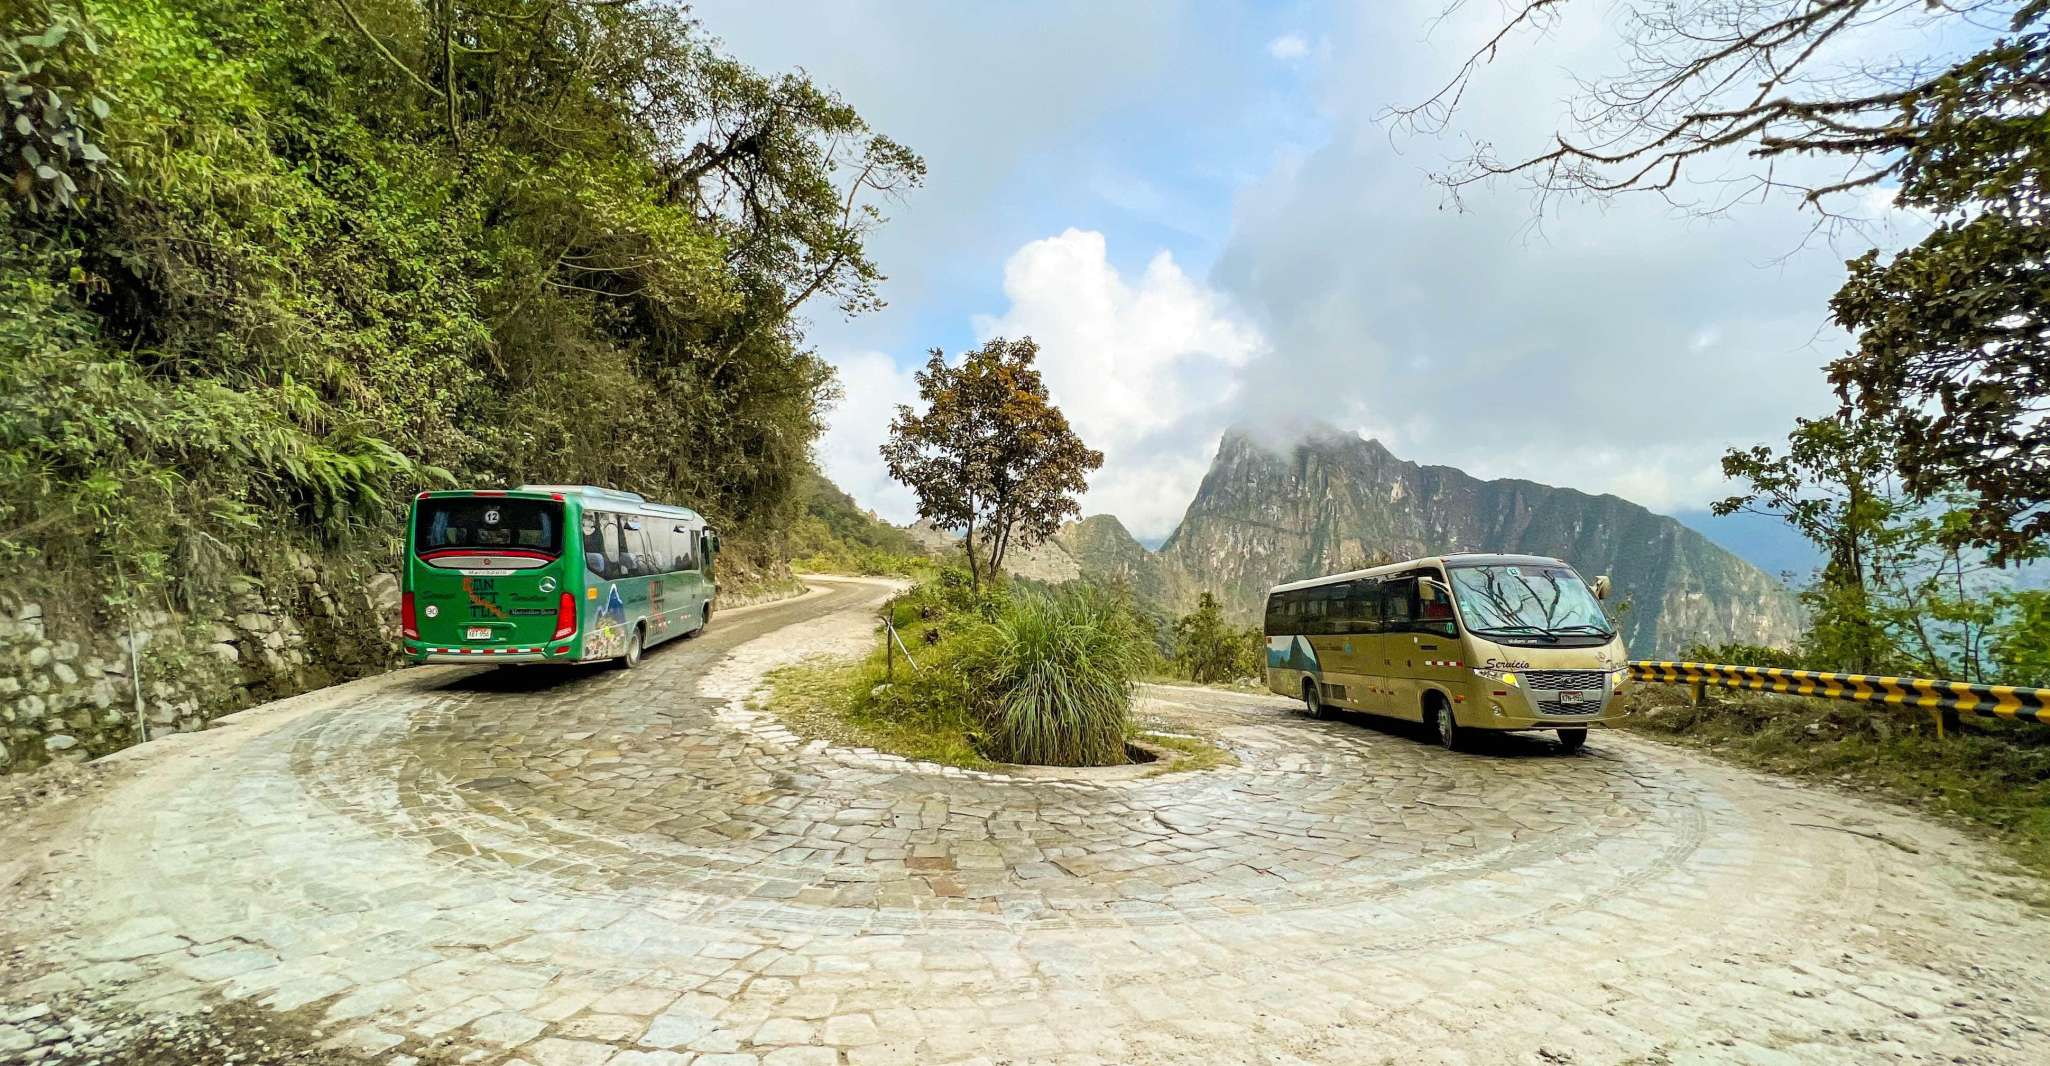 From Aguas Calientes, Round-Trip Bus Ticket to Machu Picchu - Housity